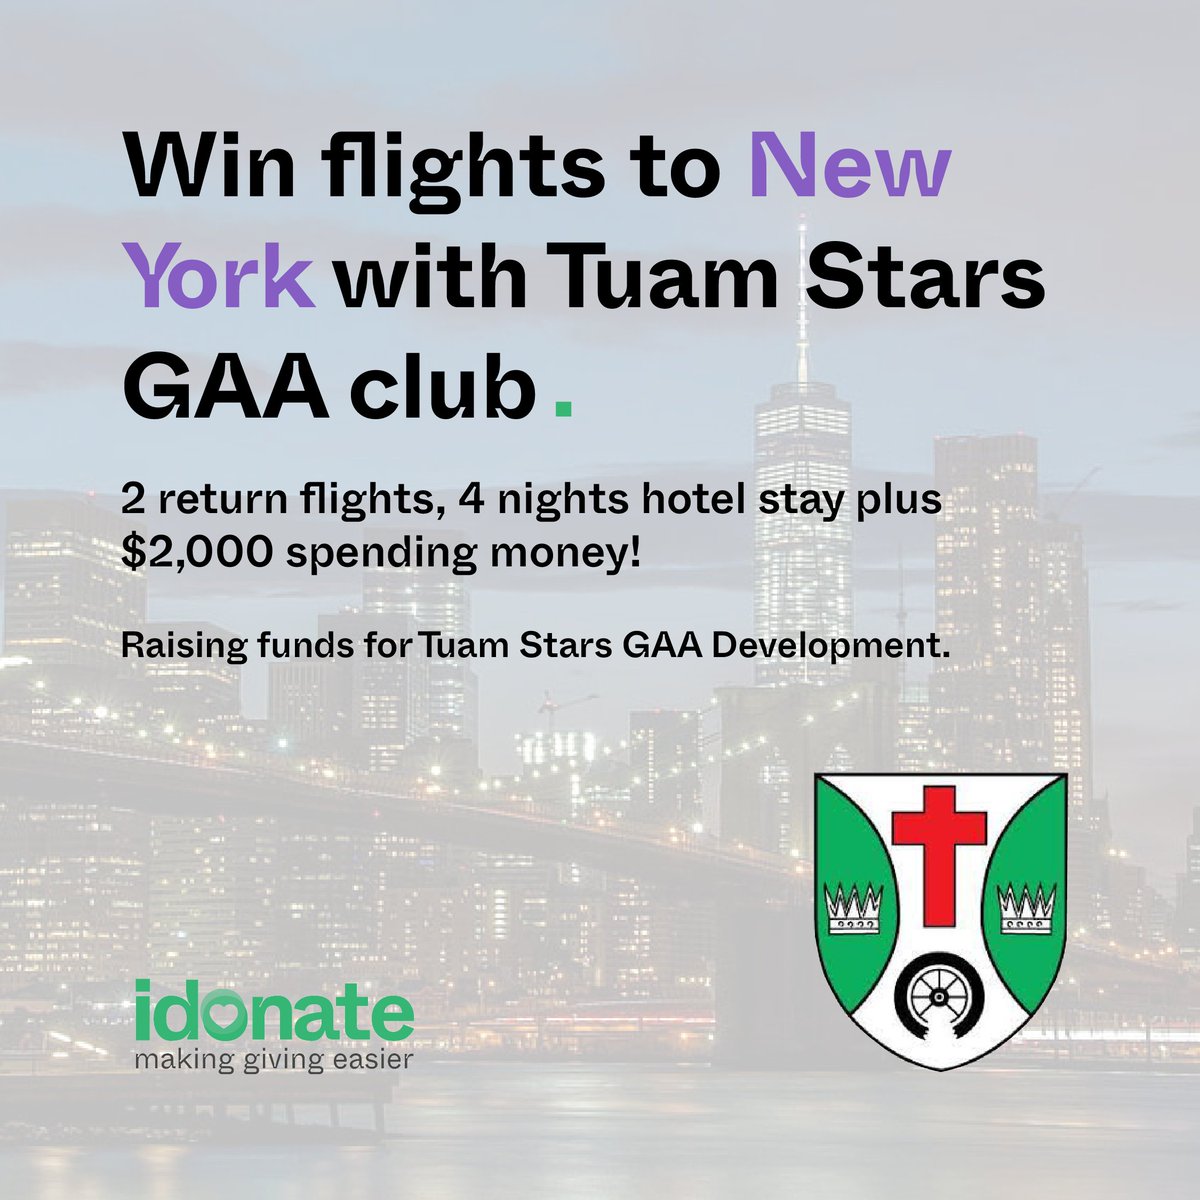 💚WIN flights to NEW YORK! 💚 Enter the Tuam Stars Club draw and be in with a chance to win an incredible prize while raising funds for the development of the club! Head over to l.idonate.ie/Gyw to view details! Draw ends 14th Feb! #idonate #tuamstars #gaa